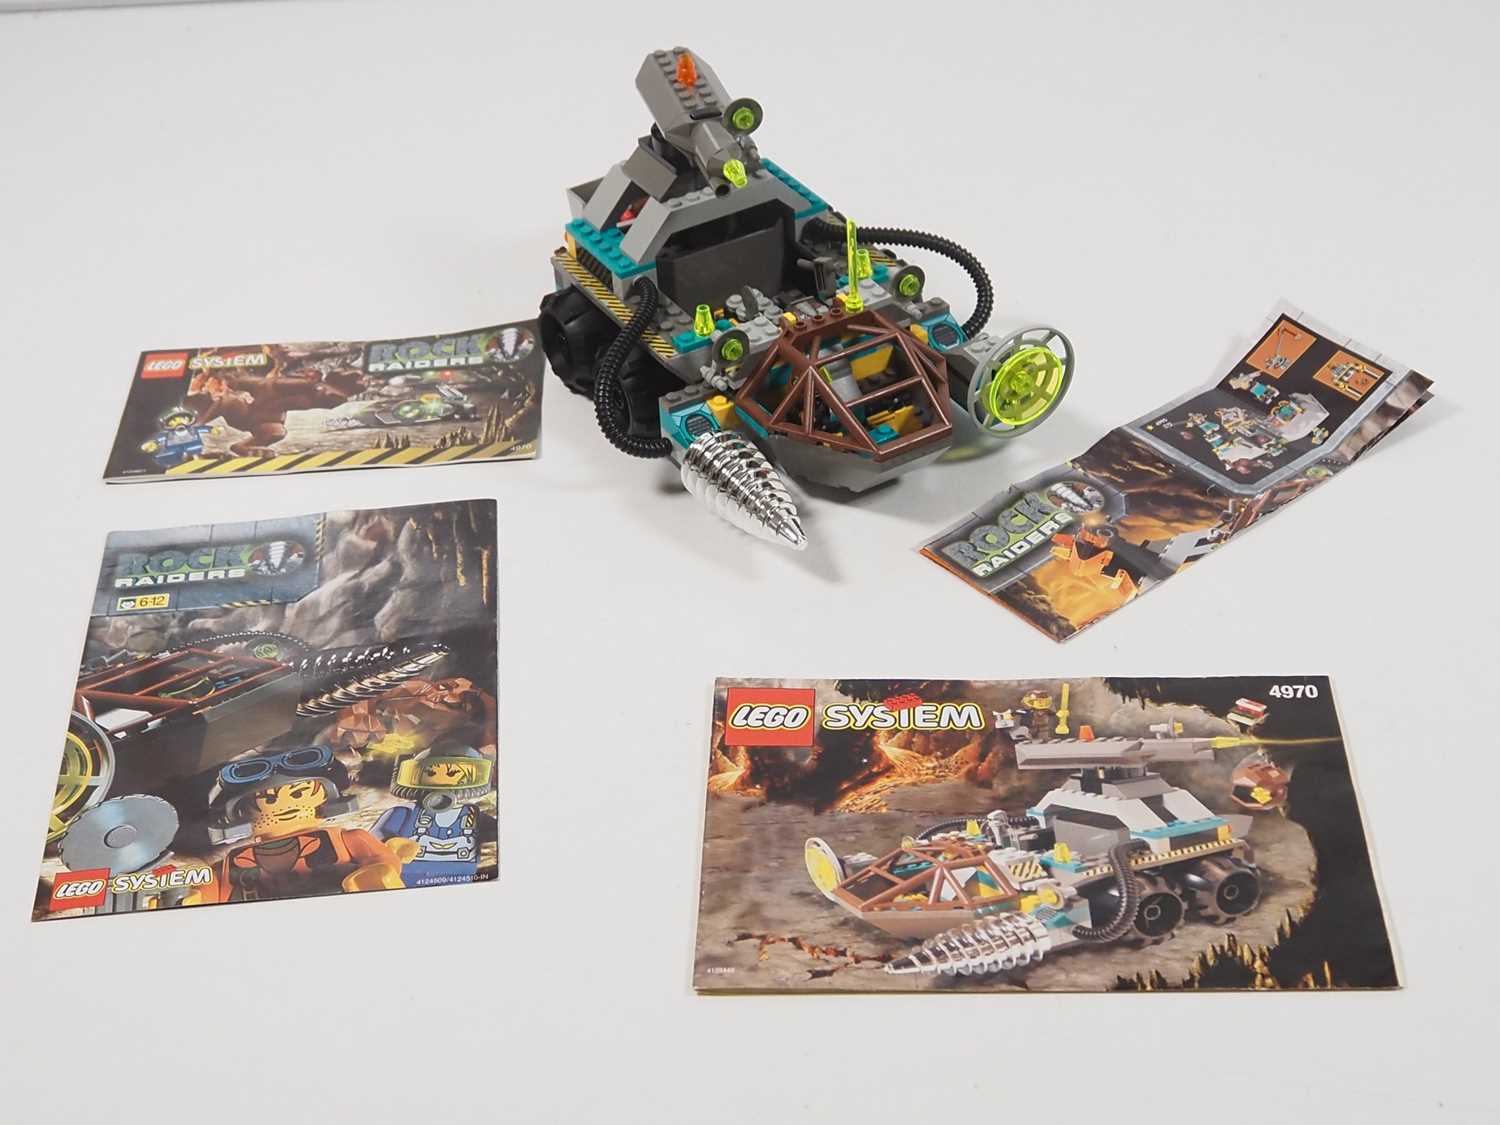 LEGO - ROCK RAIDERS #4970 Chrome Crusher - complete with instructions and picture book, battery